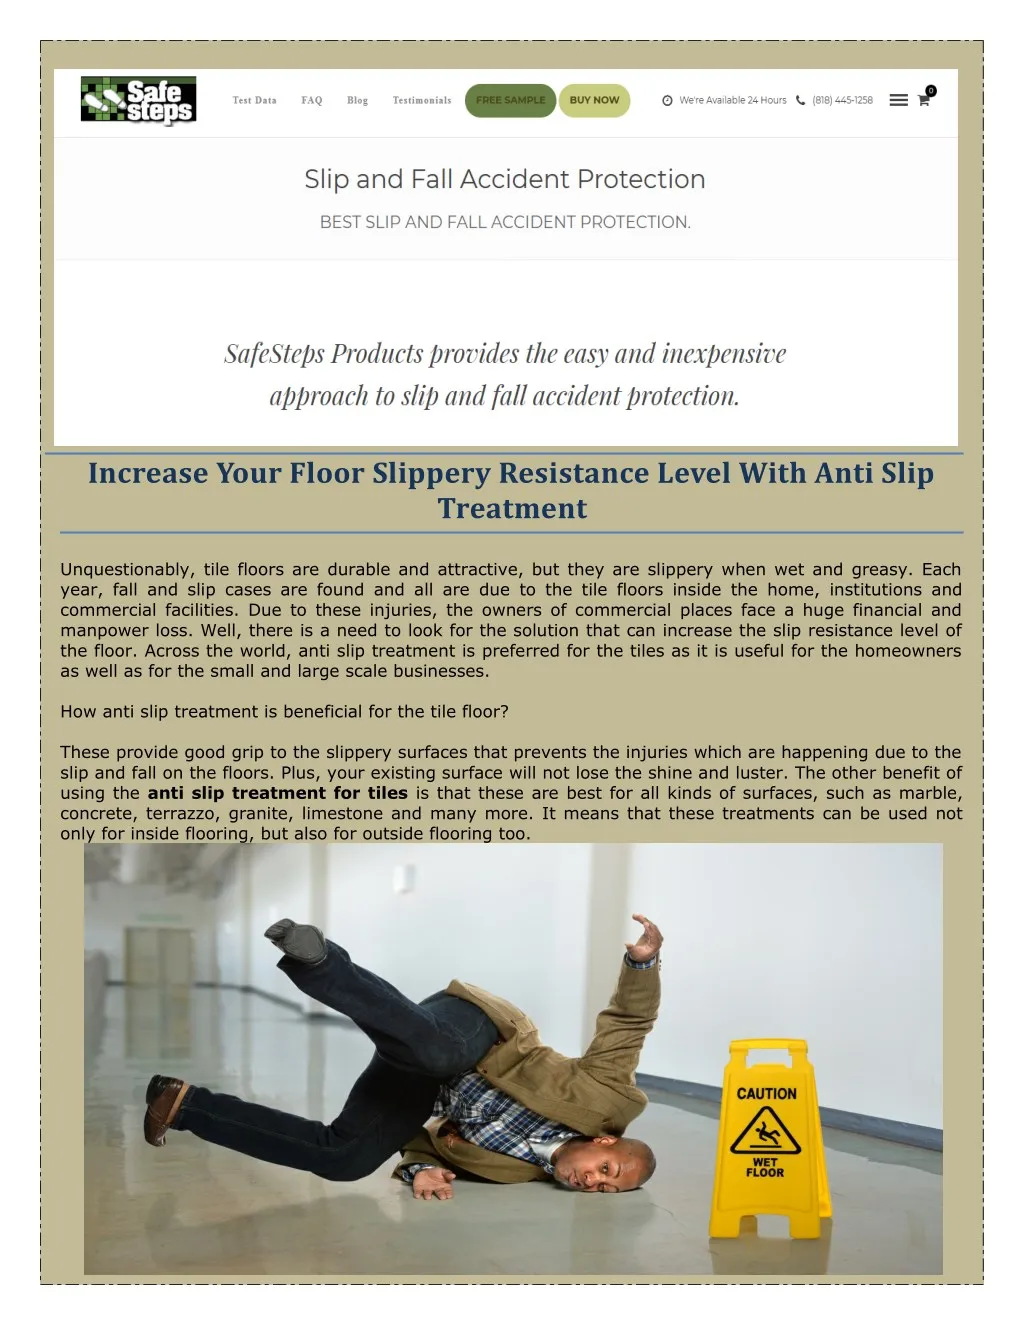 increase your floor slippery resistance level